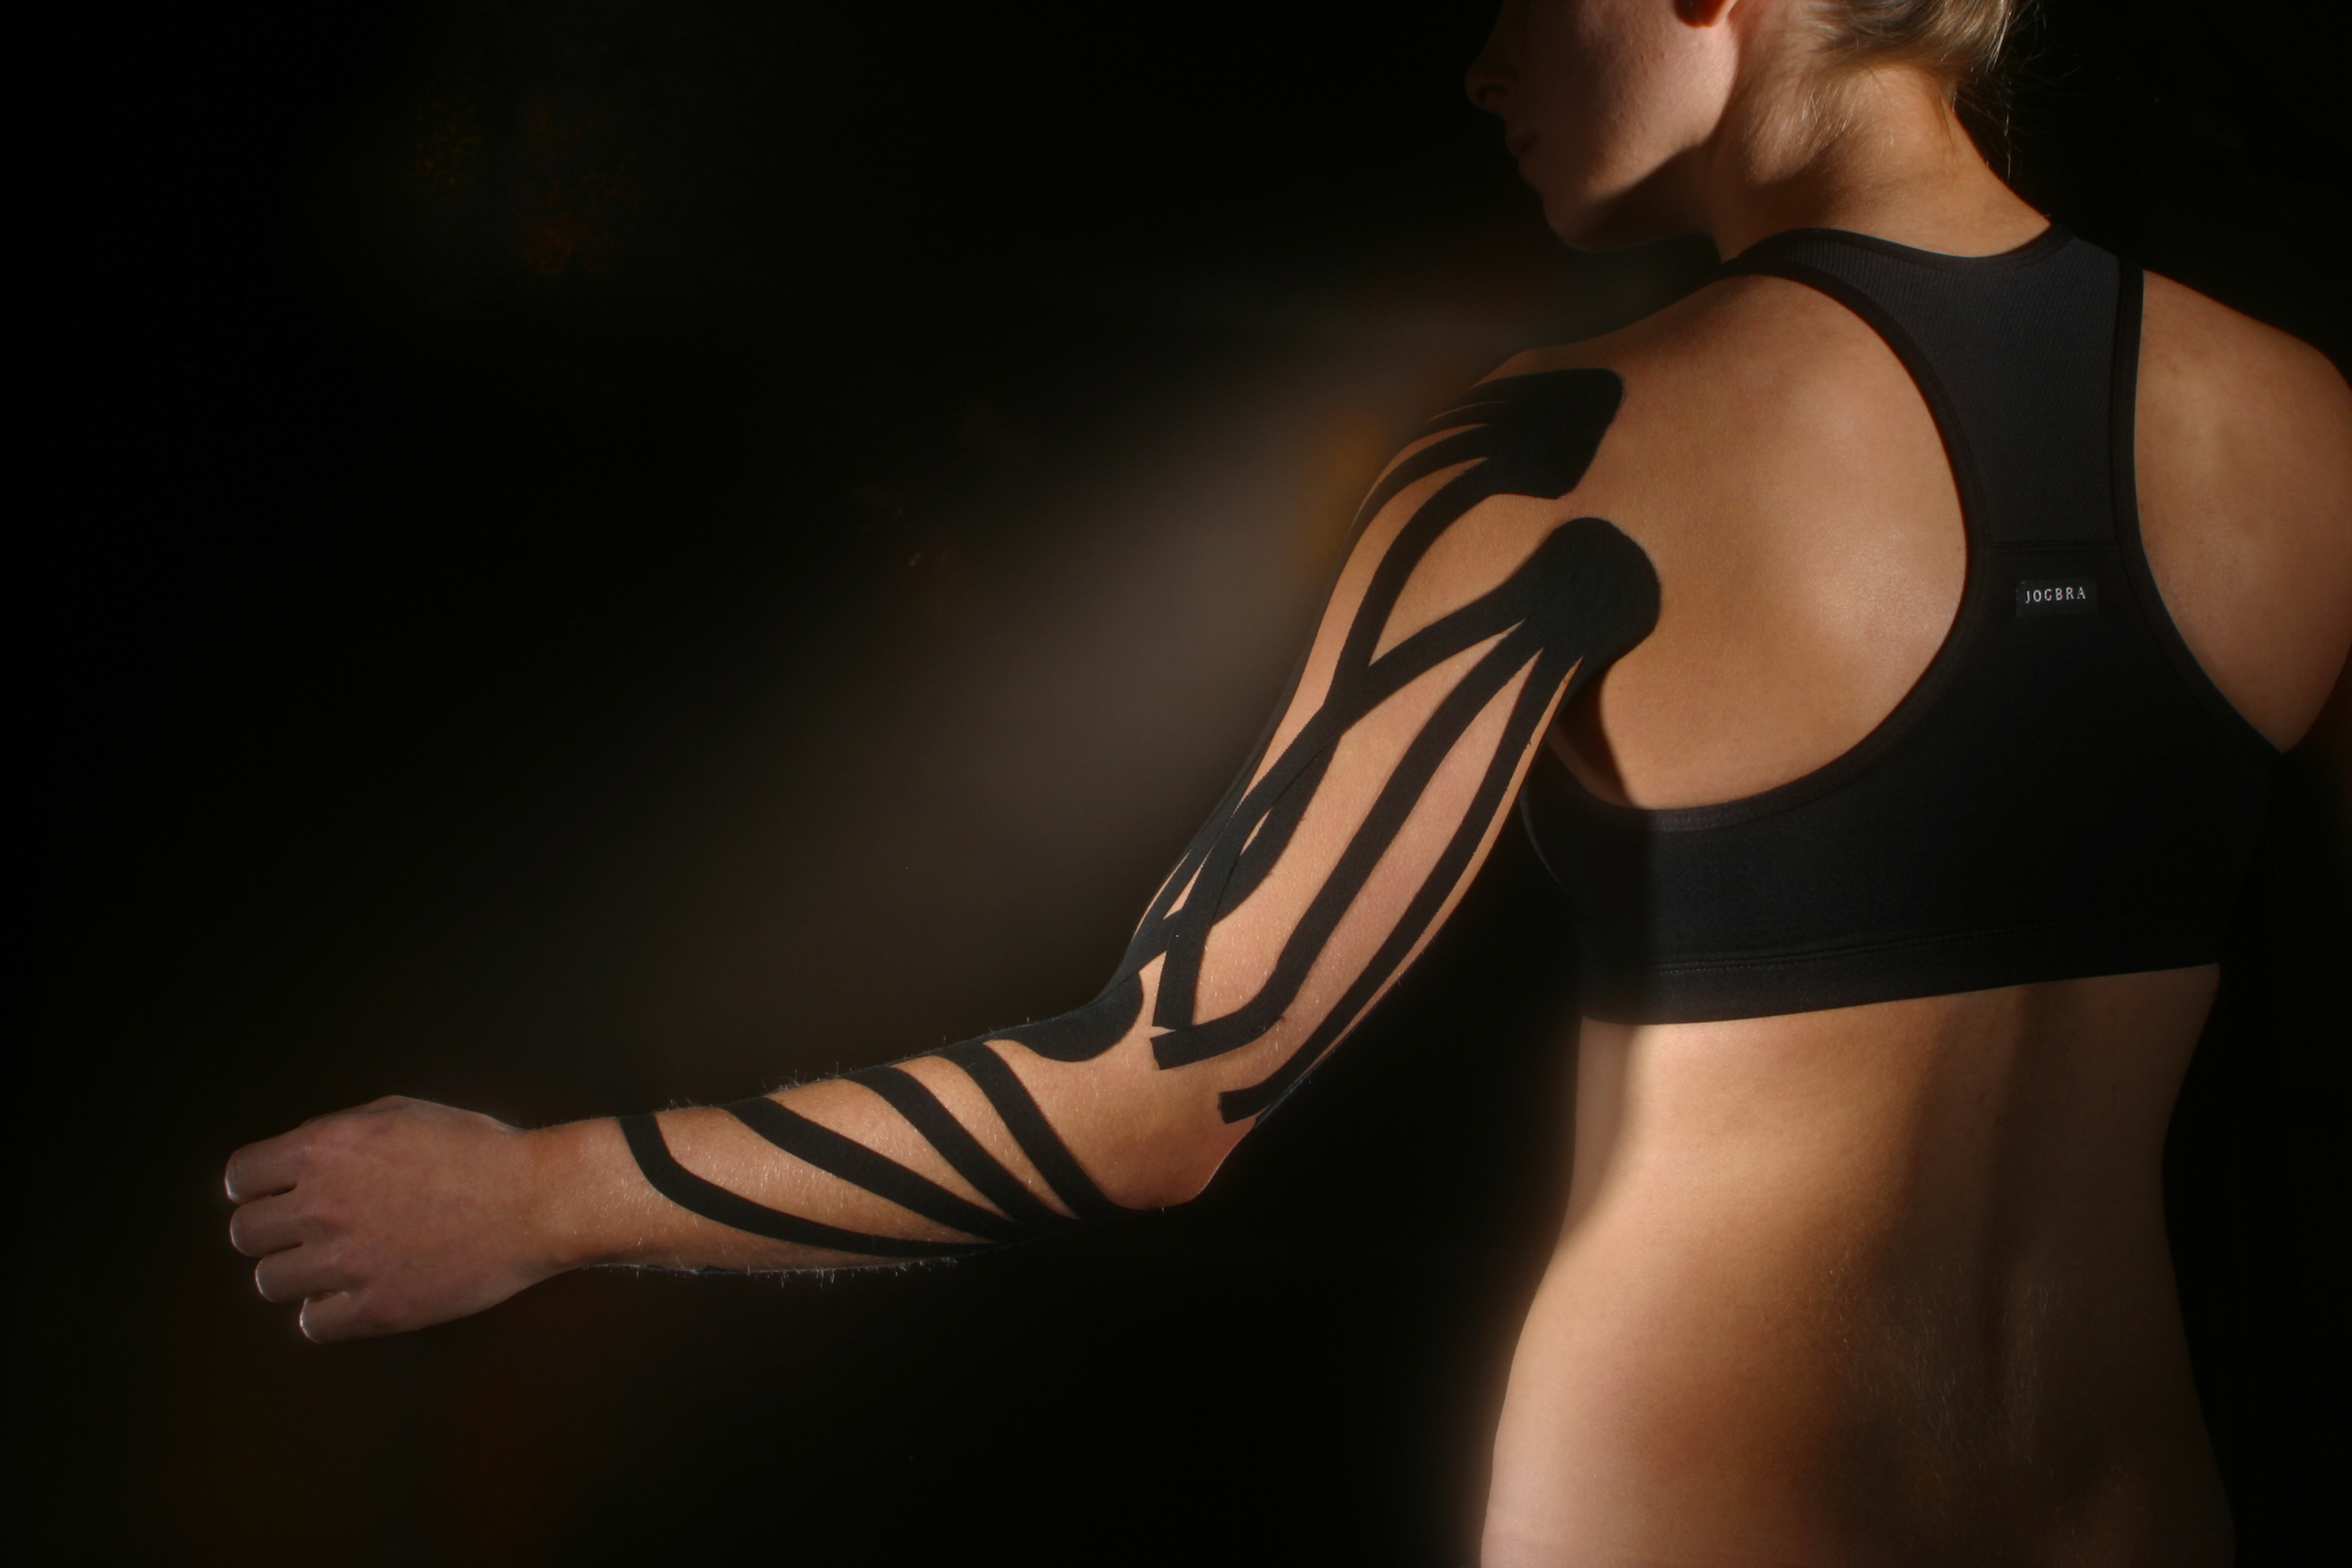 A woman in a jog bra with therapeutic kinesio tape on her arm